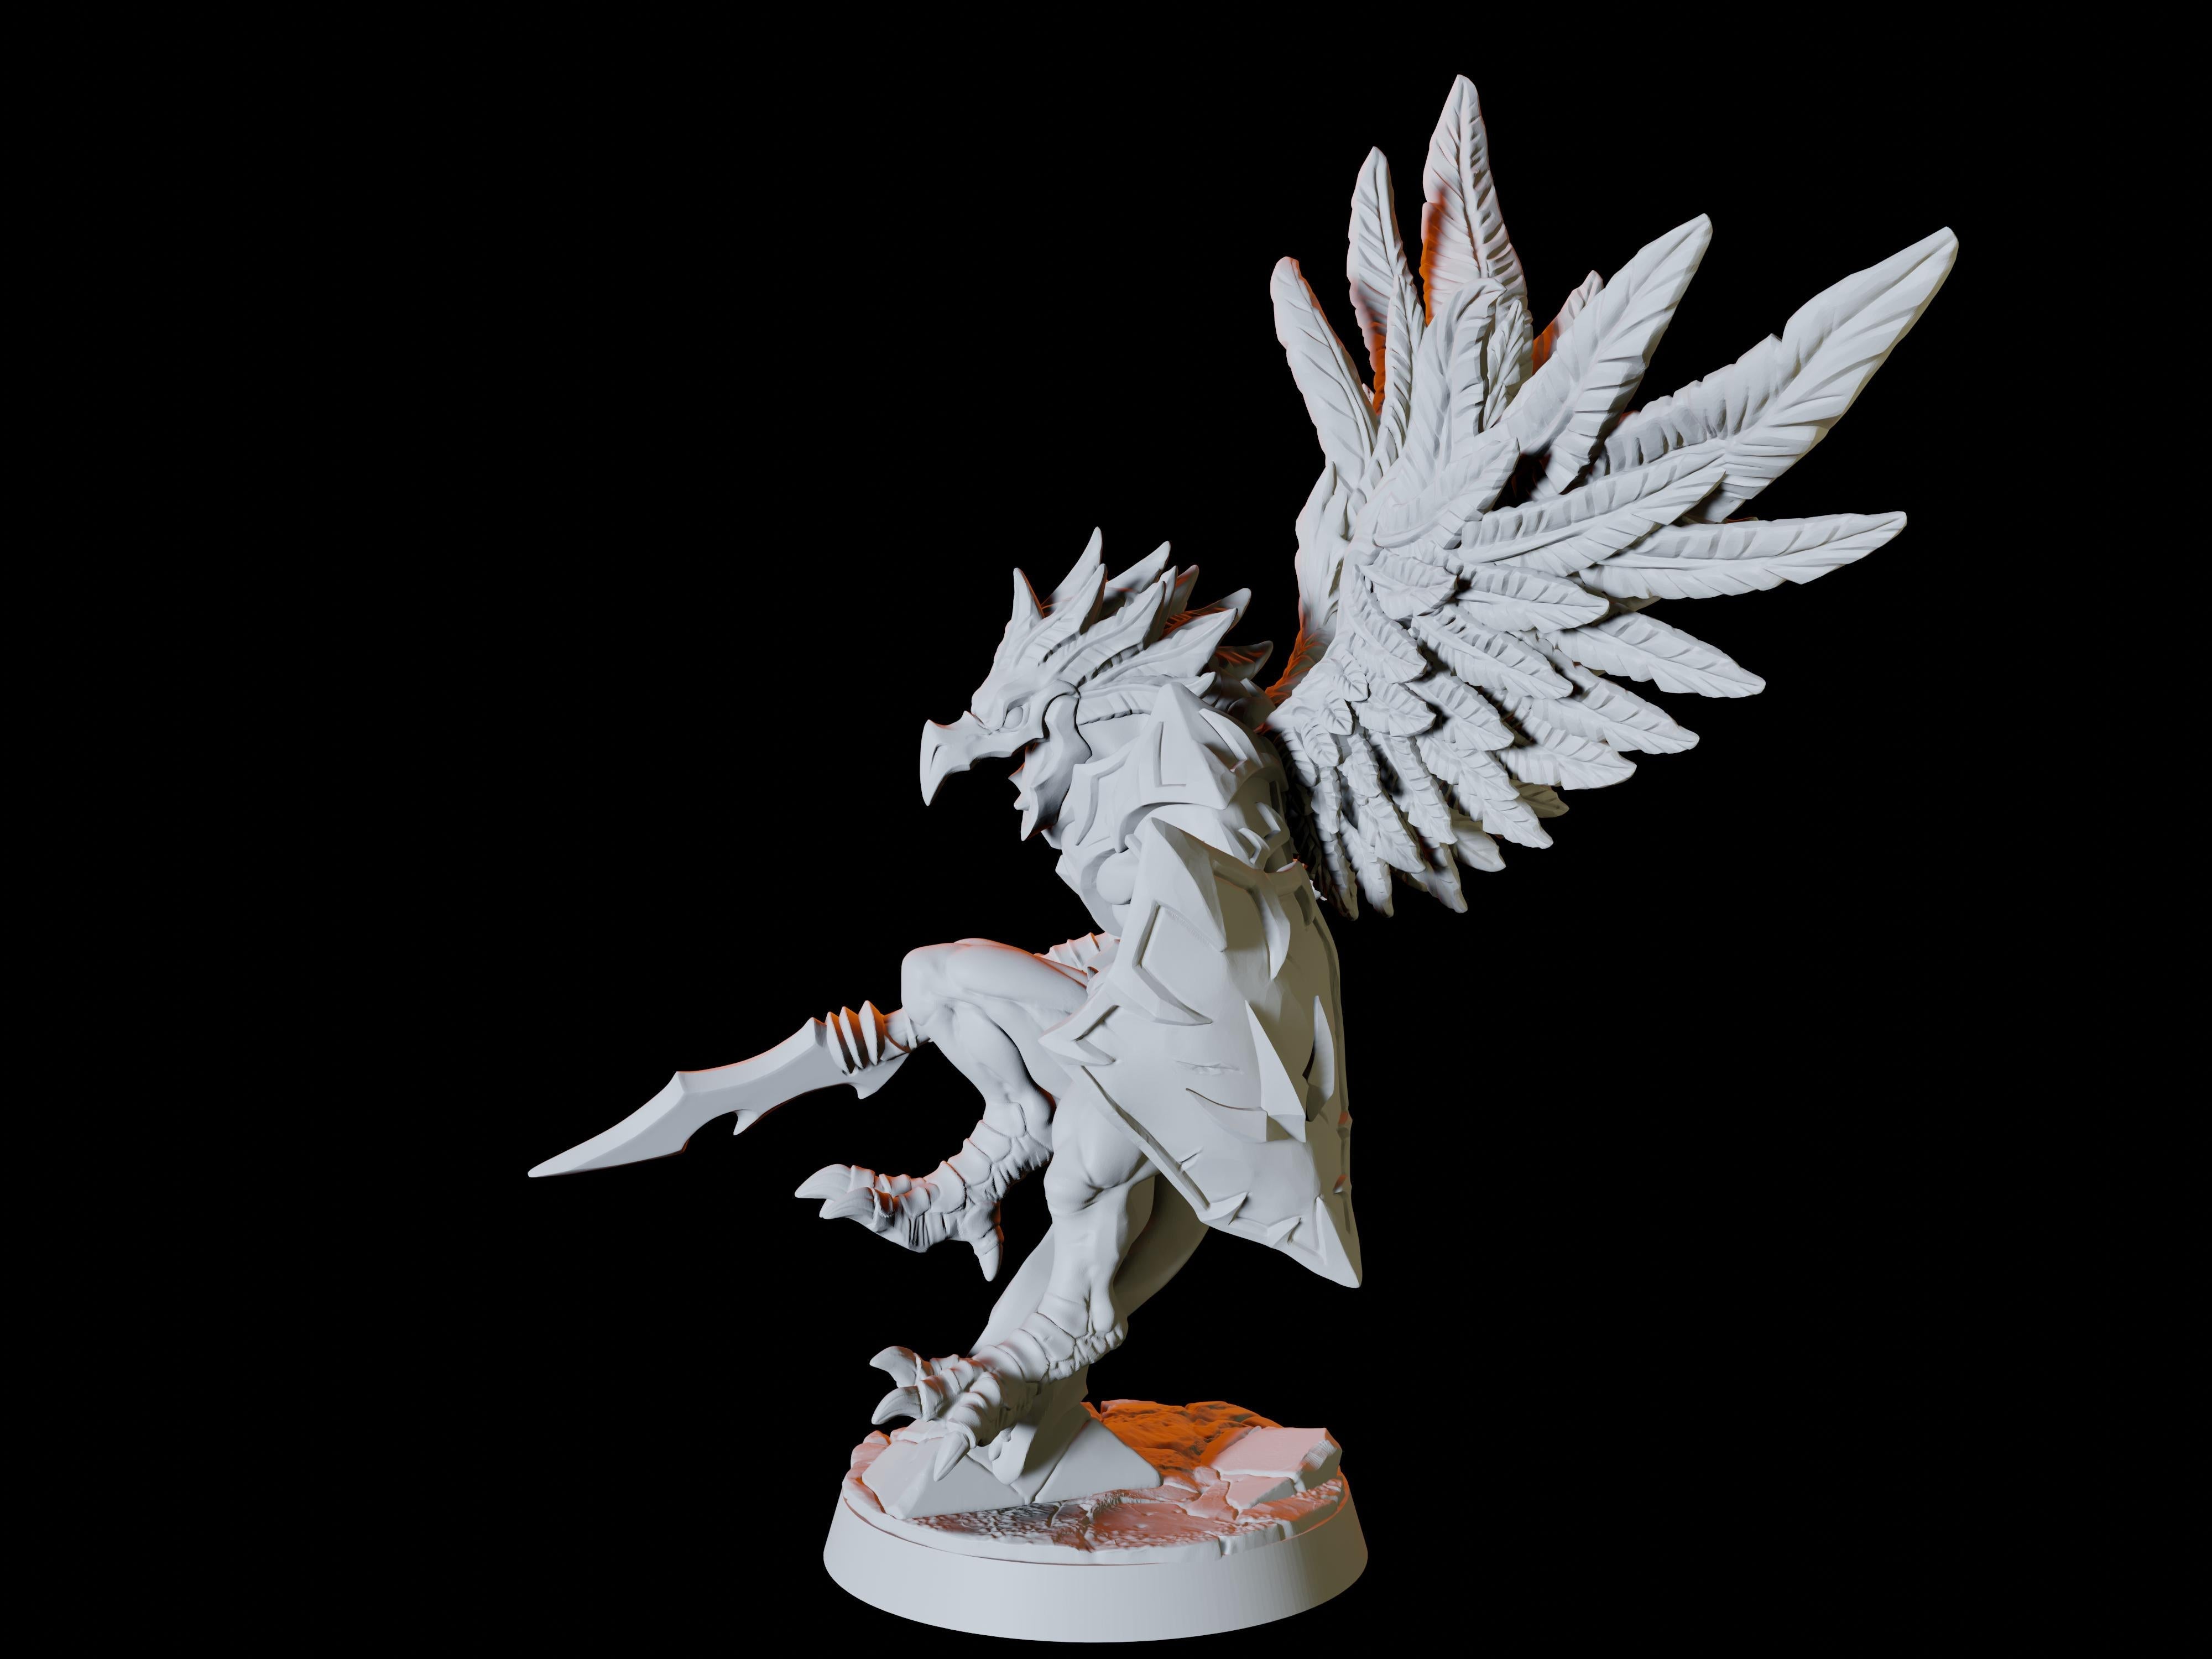 Aarakocra Miniatures for Dungeons and Dragons. There are six soldiers, printed by Myth Forged